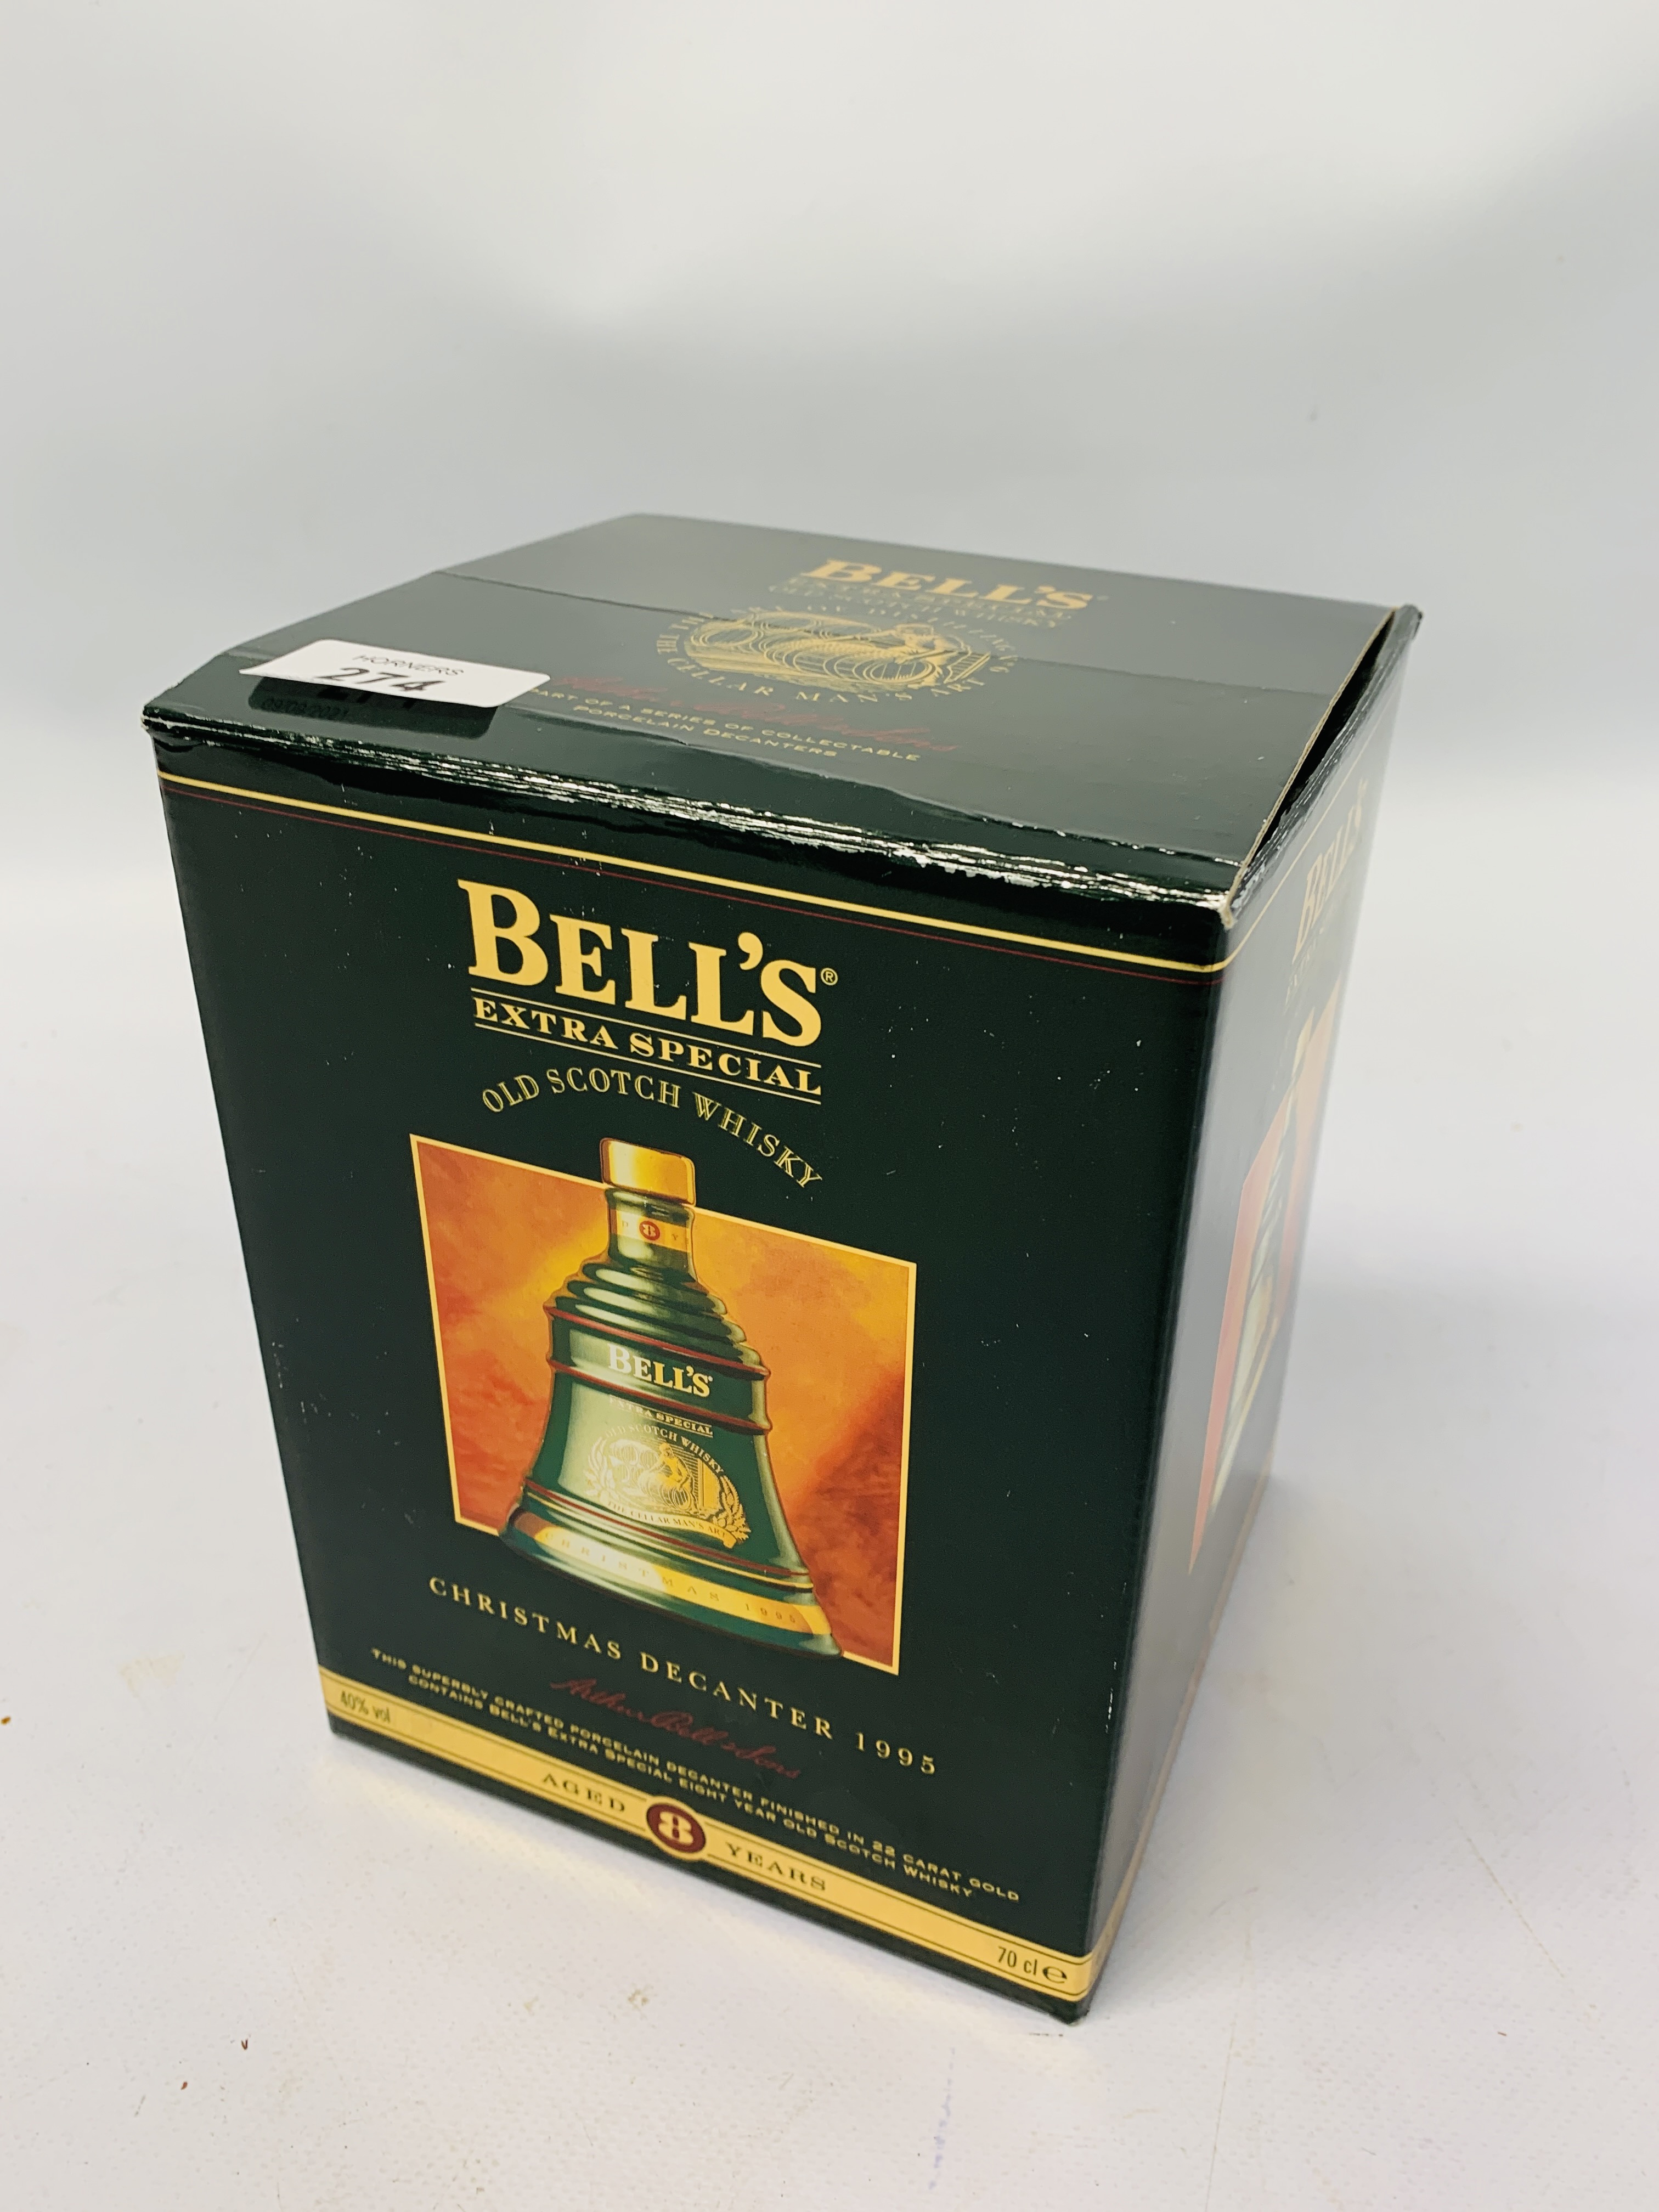 BELLS OLD SCOTCH WHISKY L EDITION CHRISTMAS 1999 DECANTER 70CL (BOXED)